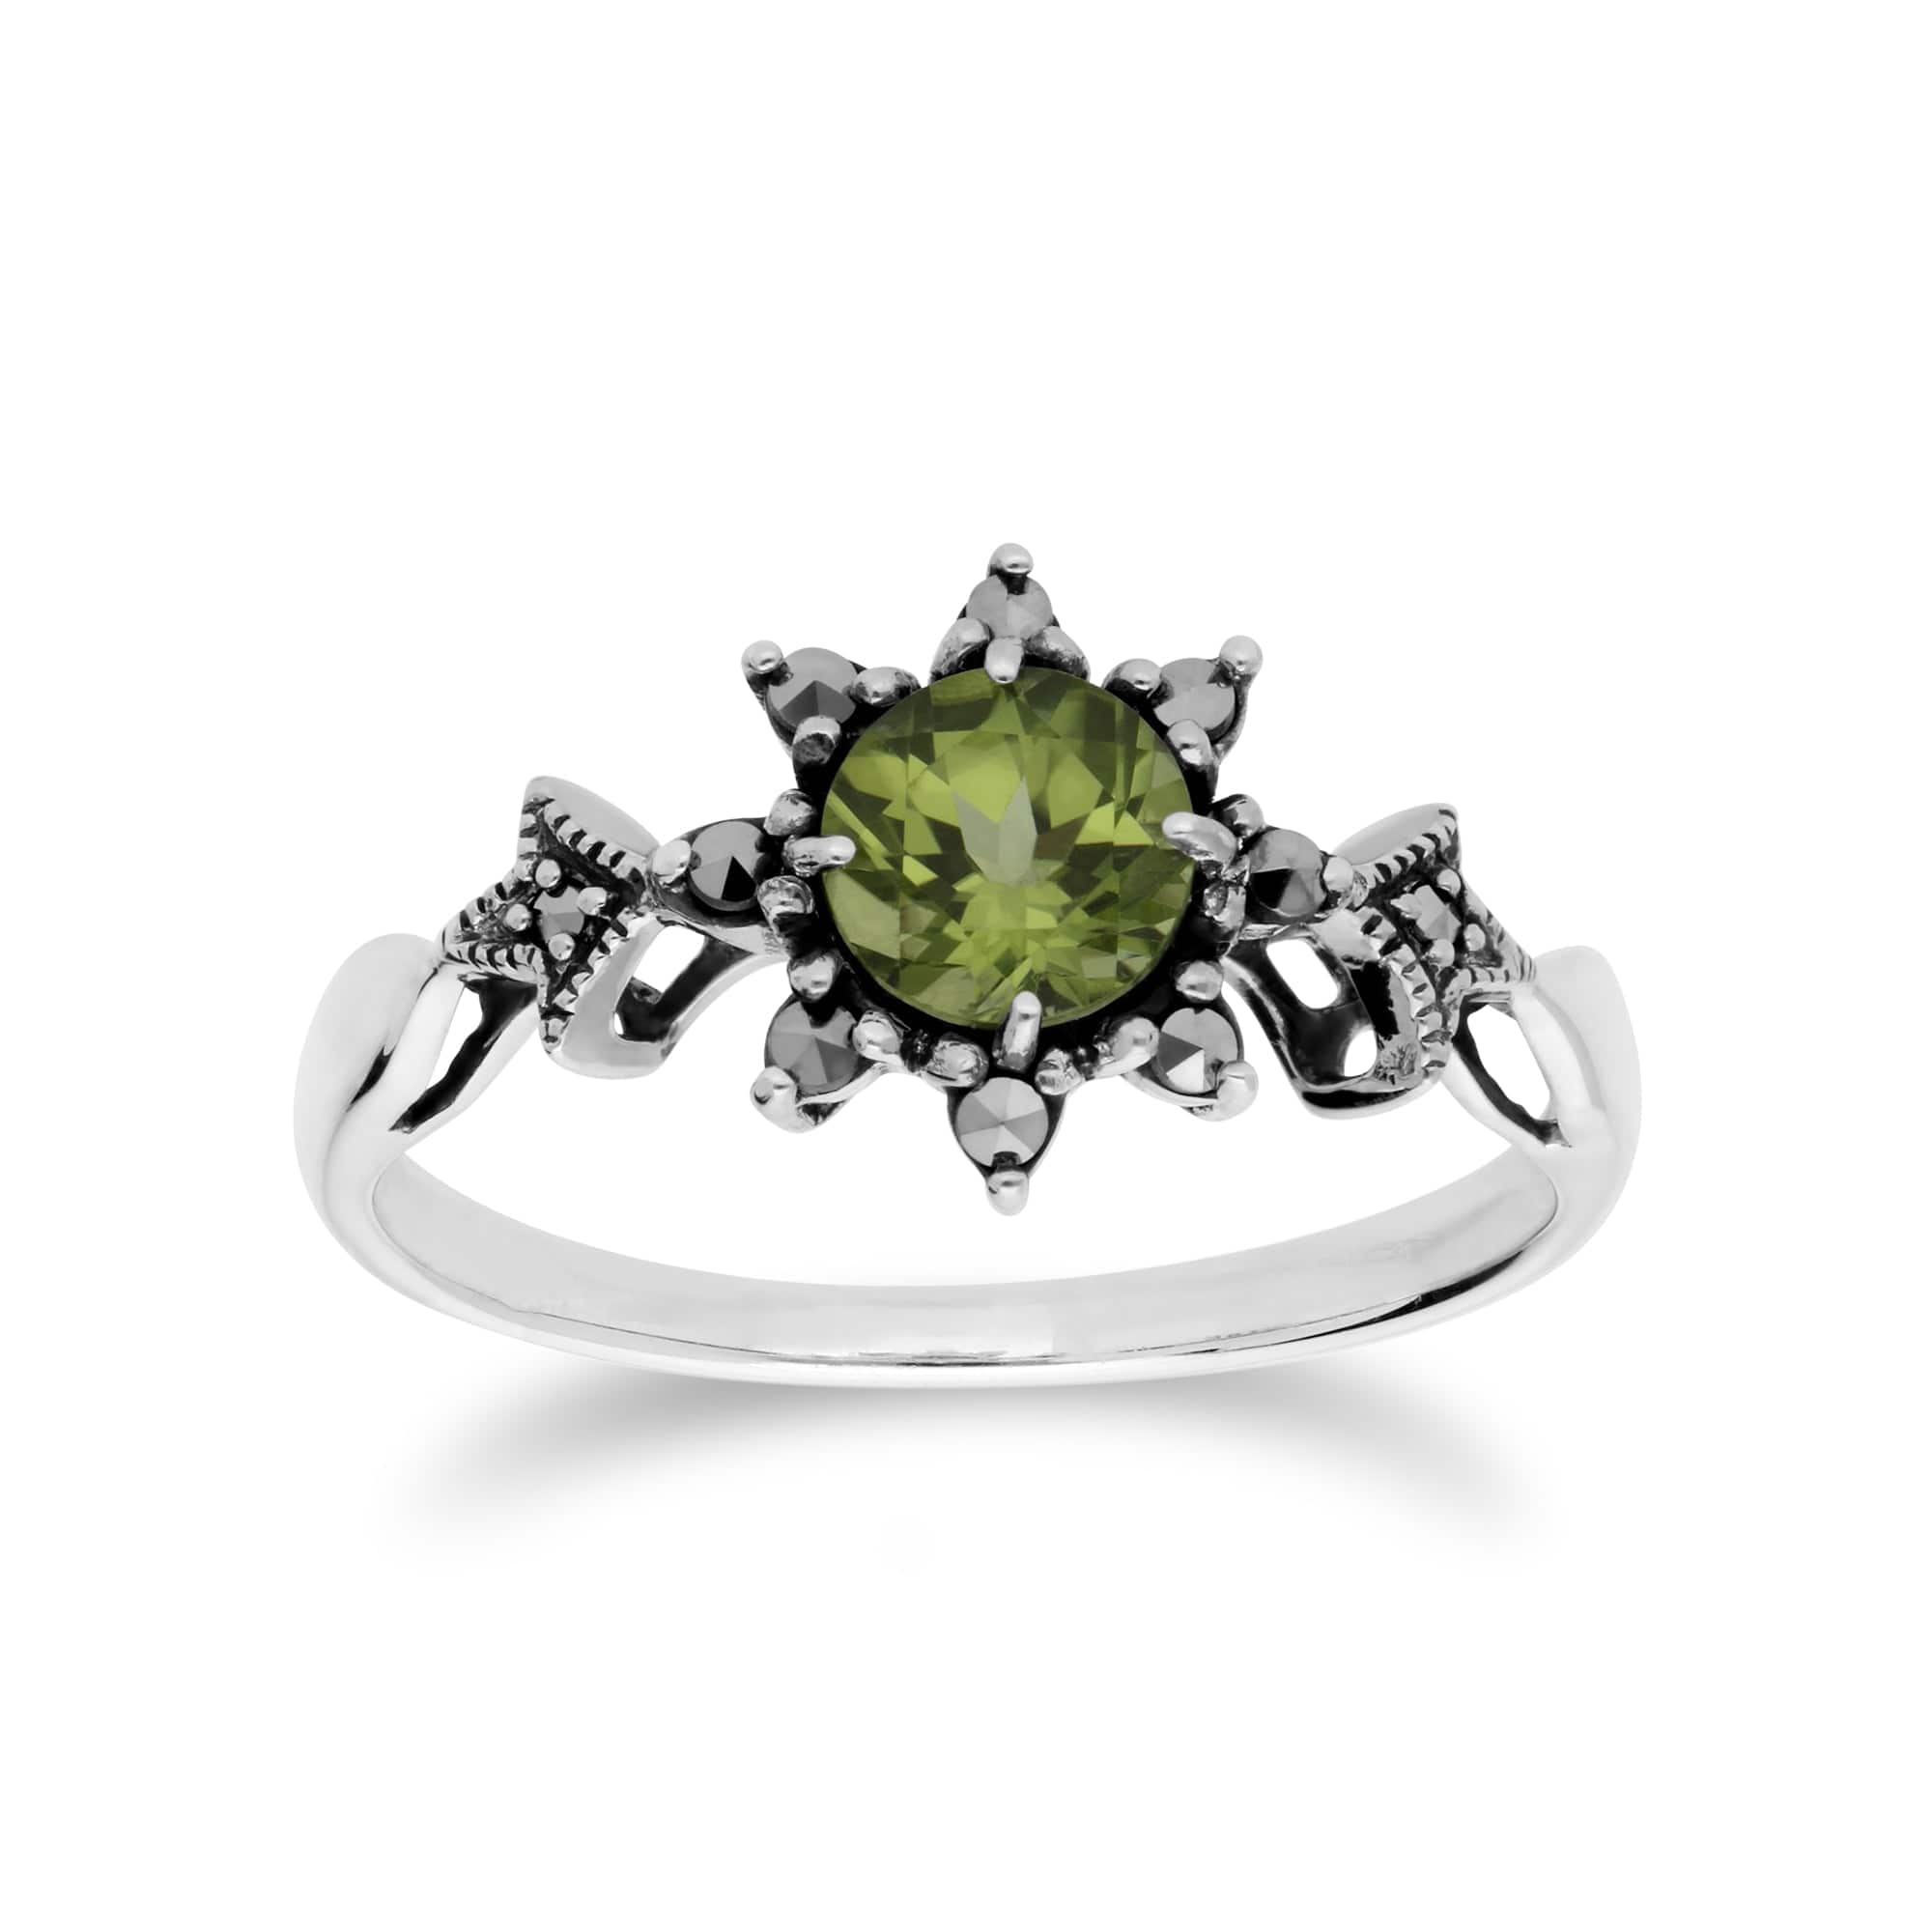 Art Deco Style Round Peridot & Marcasite Floral Ring in 925 Sterling Silver - Gemondo